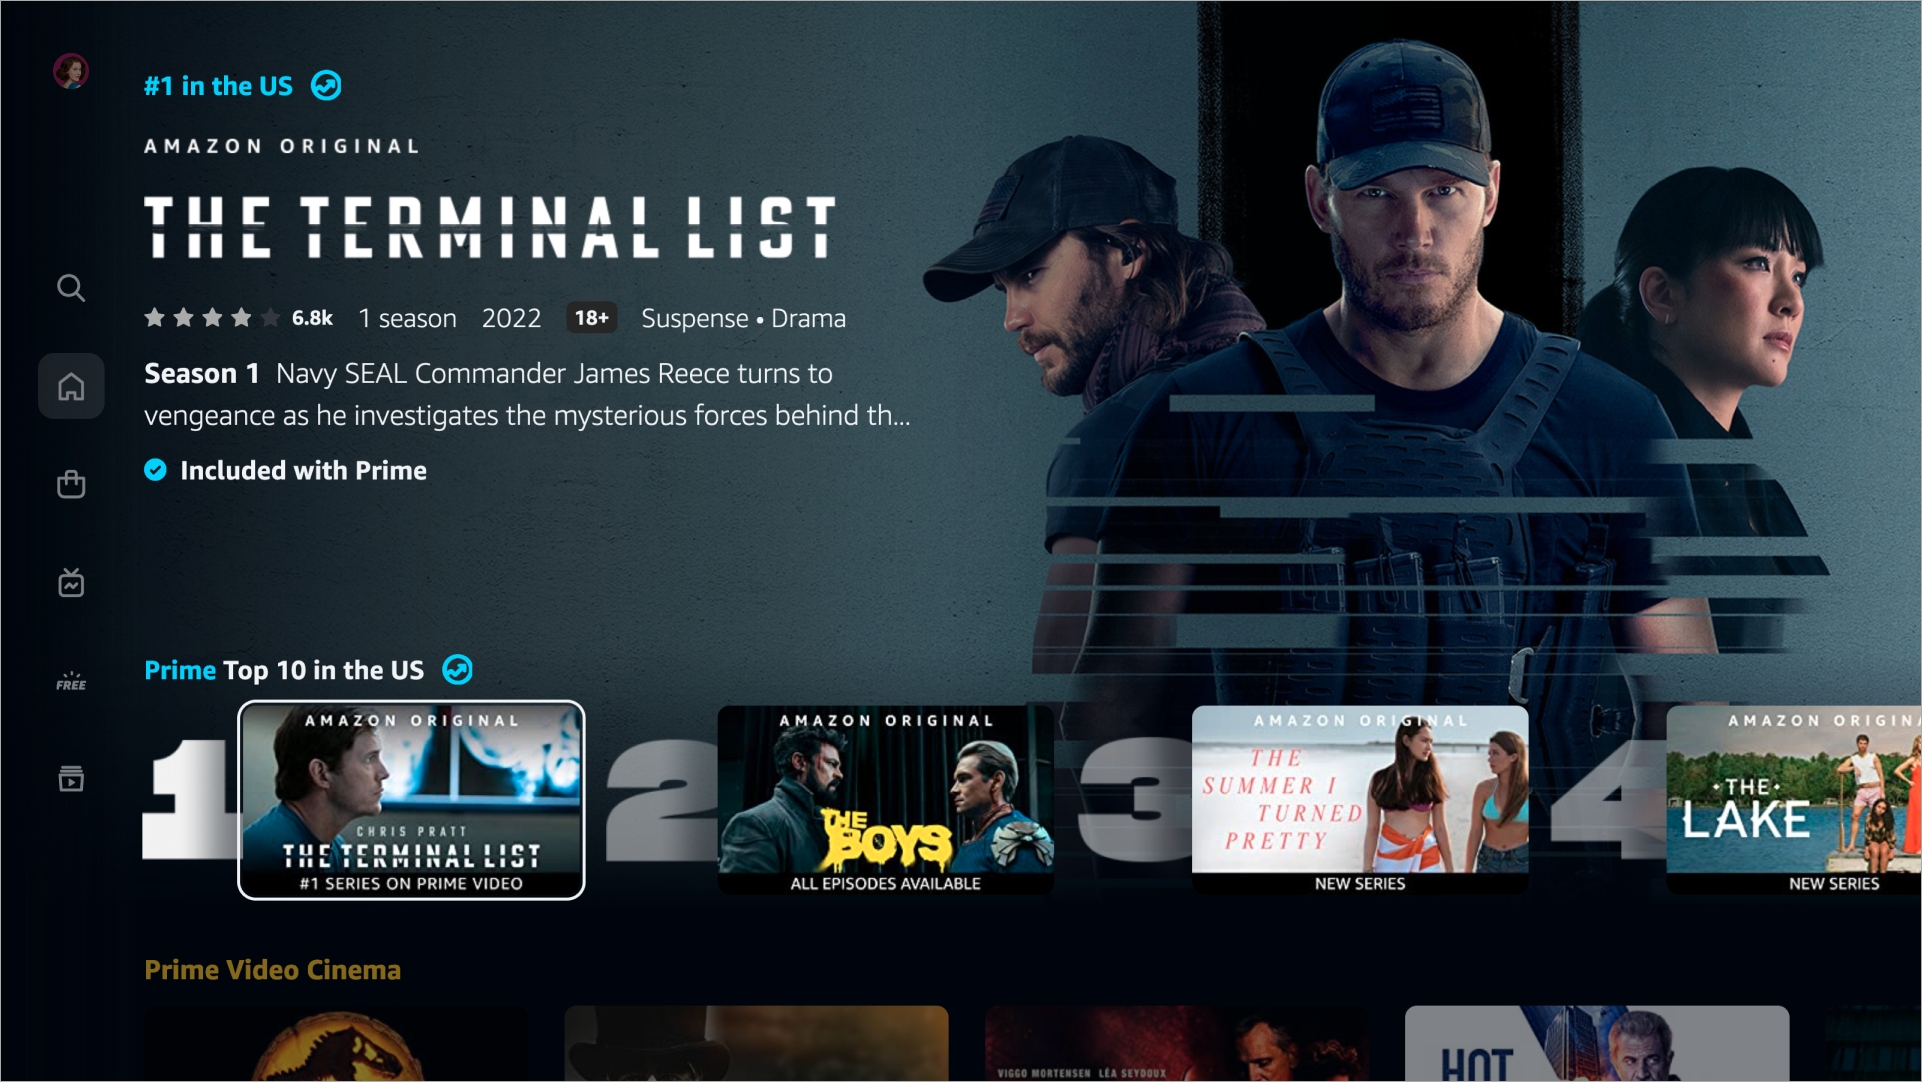 Connected TV Advertising on Amazon Prime Video